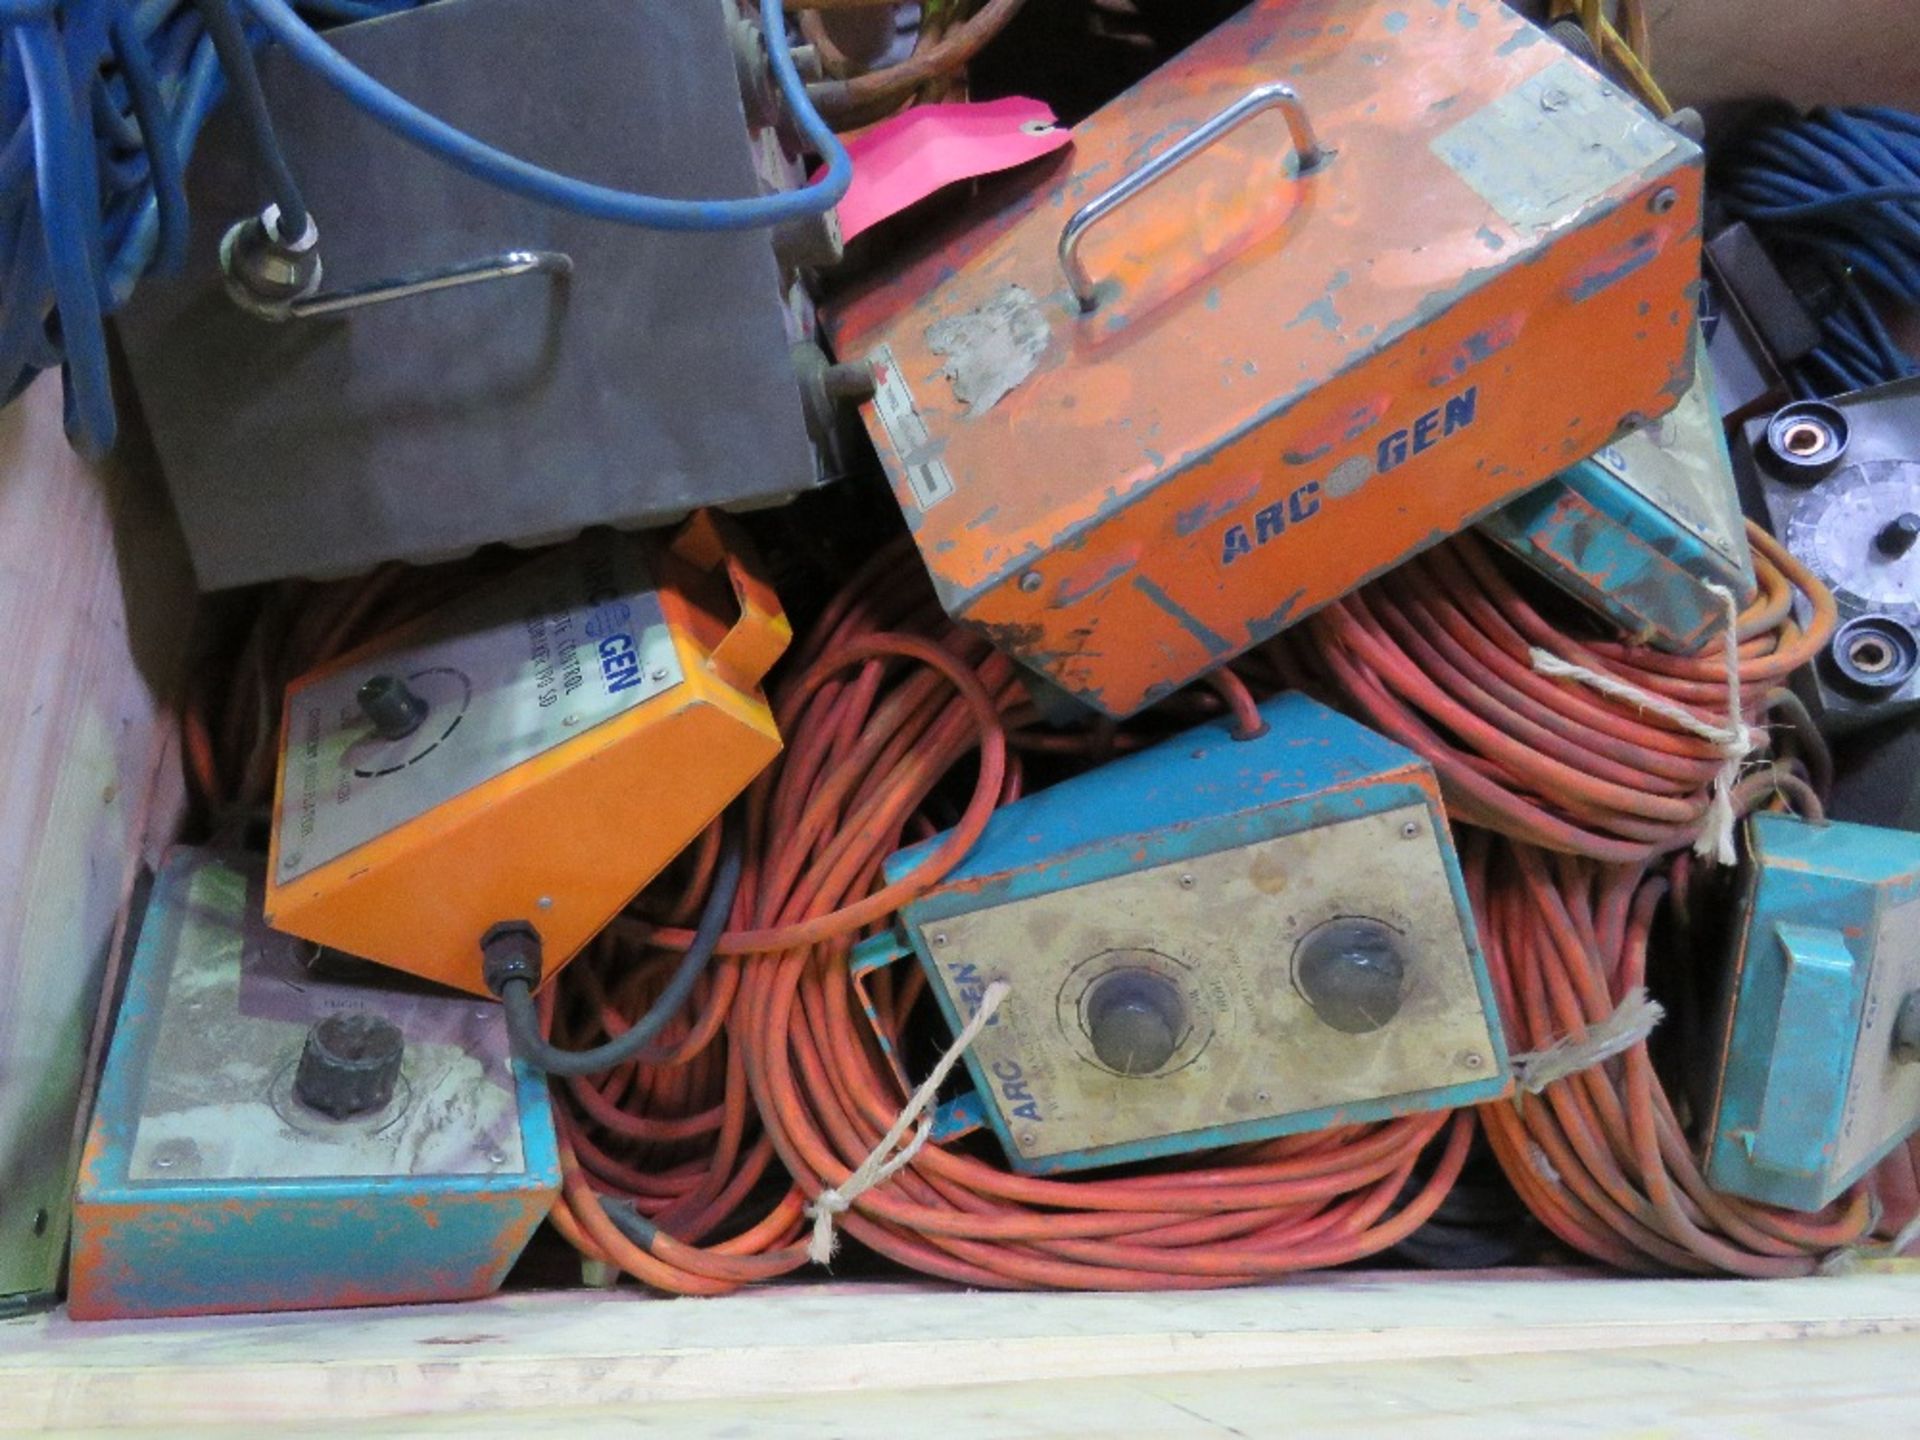 STILLAGE OF WELDING LEADS AND CONTROLLERS ETC. - Image 3 of 7